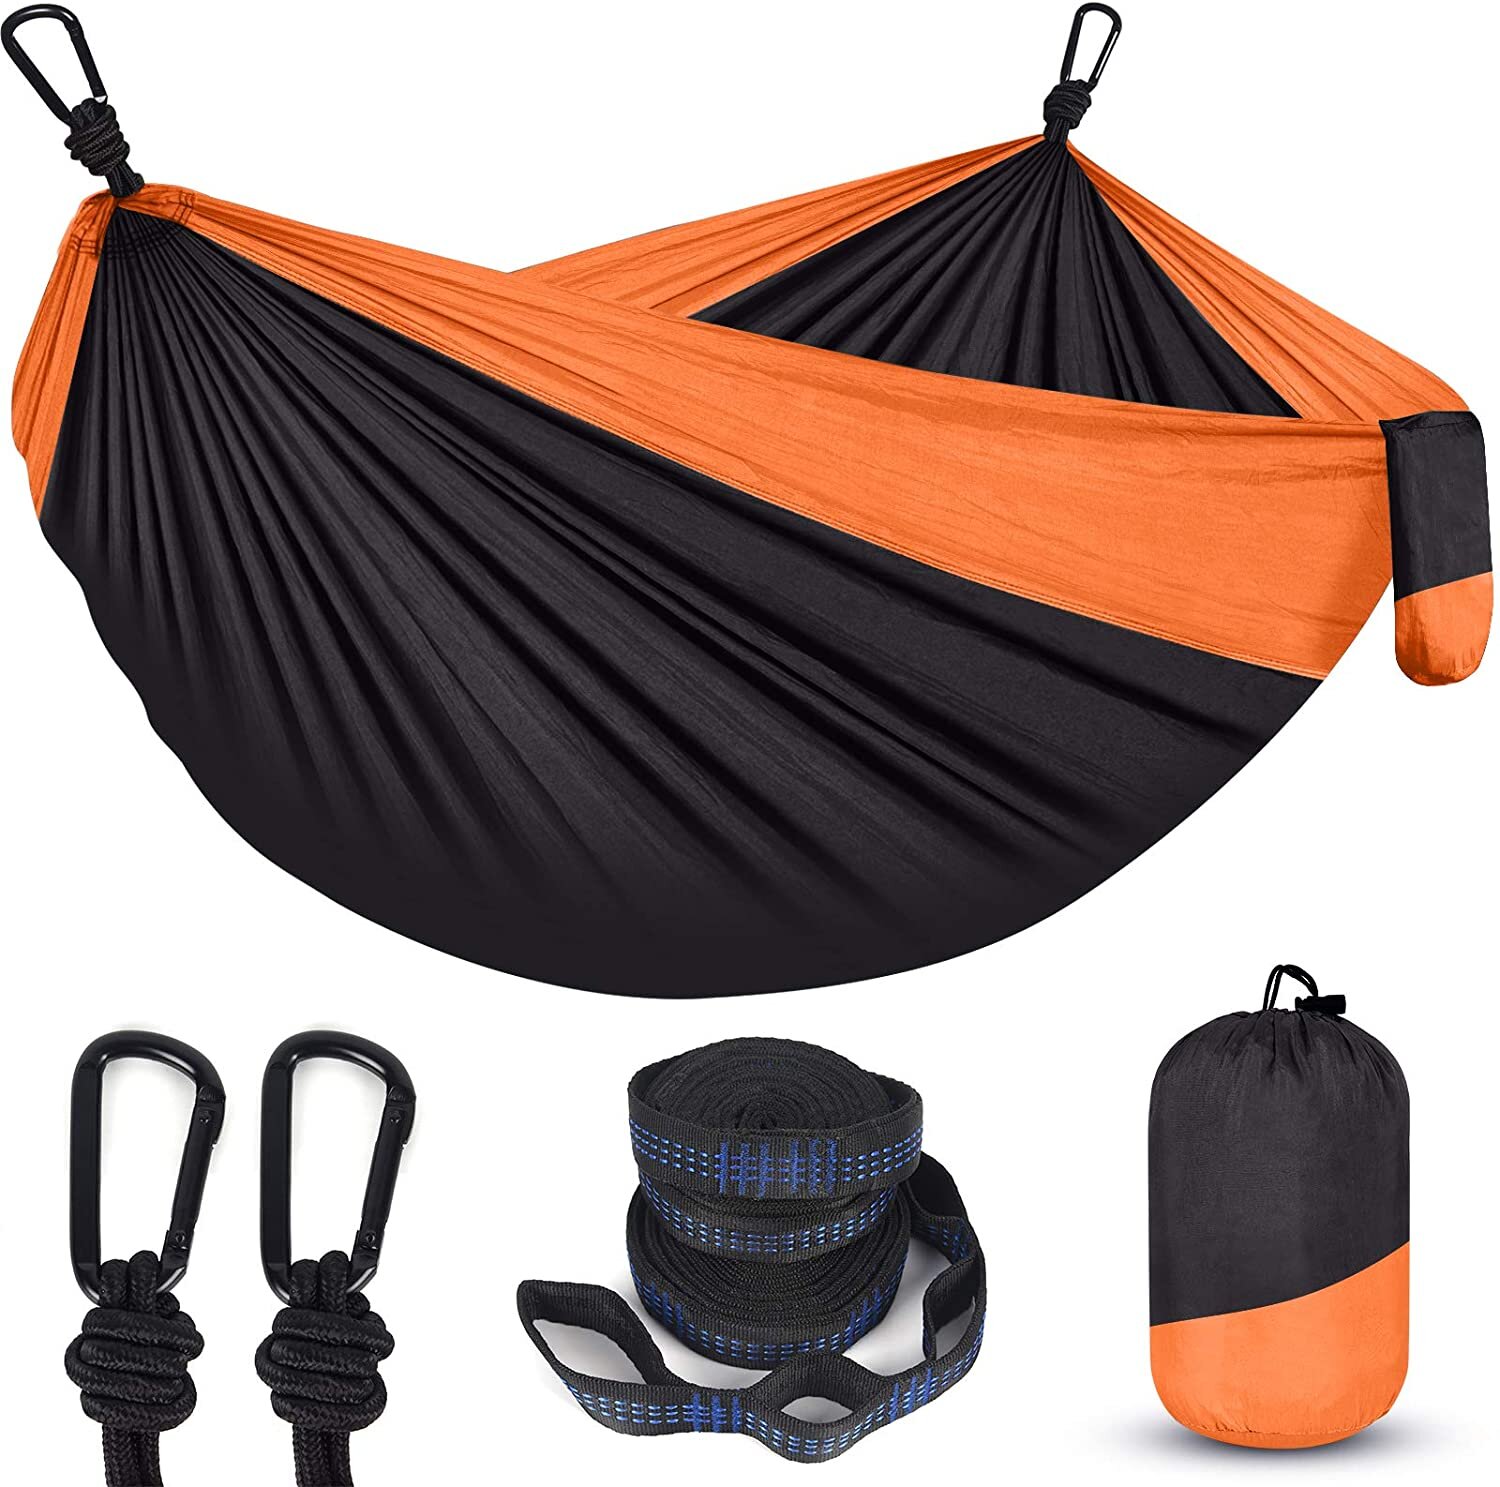 Outdoor Beach Portable Hammock with Tree Straps Camping Hammock Backyard Hiking for Kids and Adult 10+2 Loops Single Travel Hammock with 210T Nylon Lightweight Parachute Hammocks for Backpack 